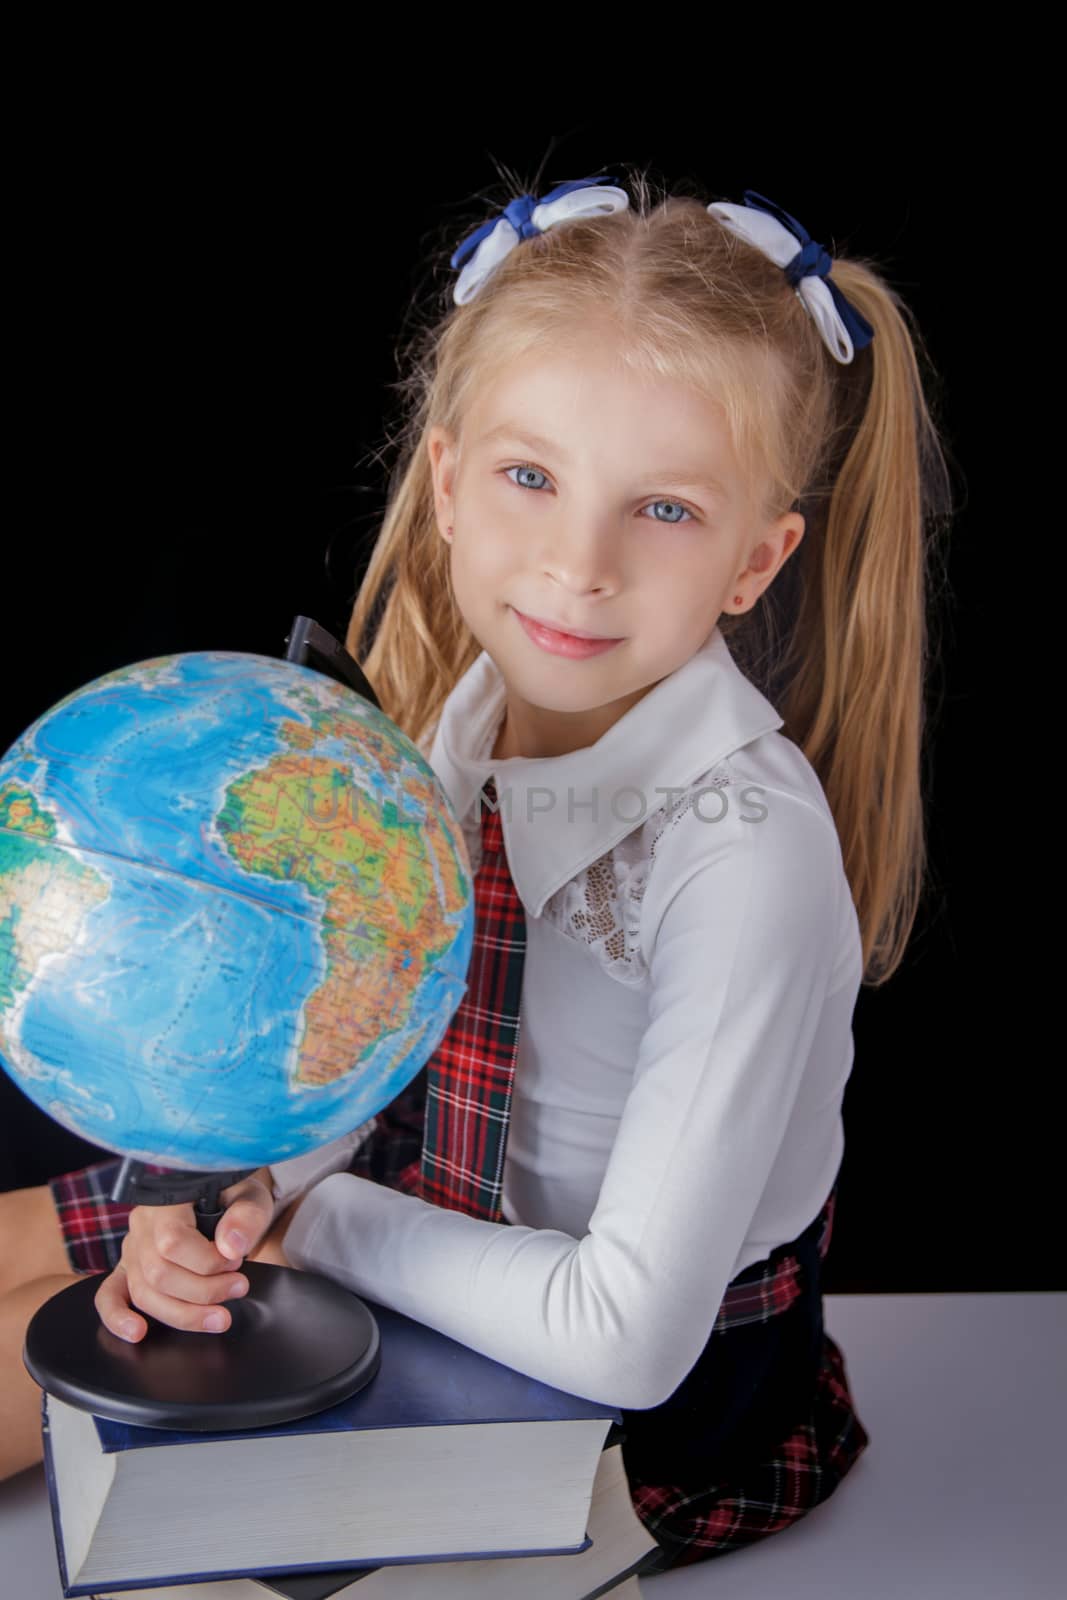 Schoolgirl with globe sitting on black background by Angel_a